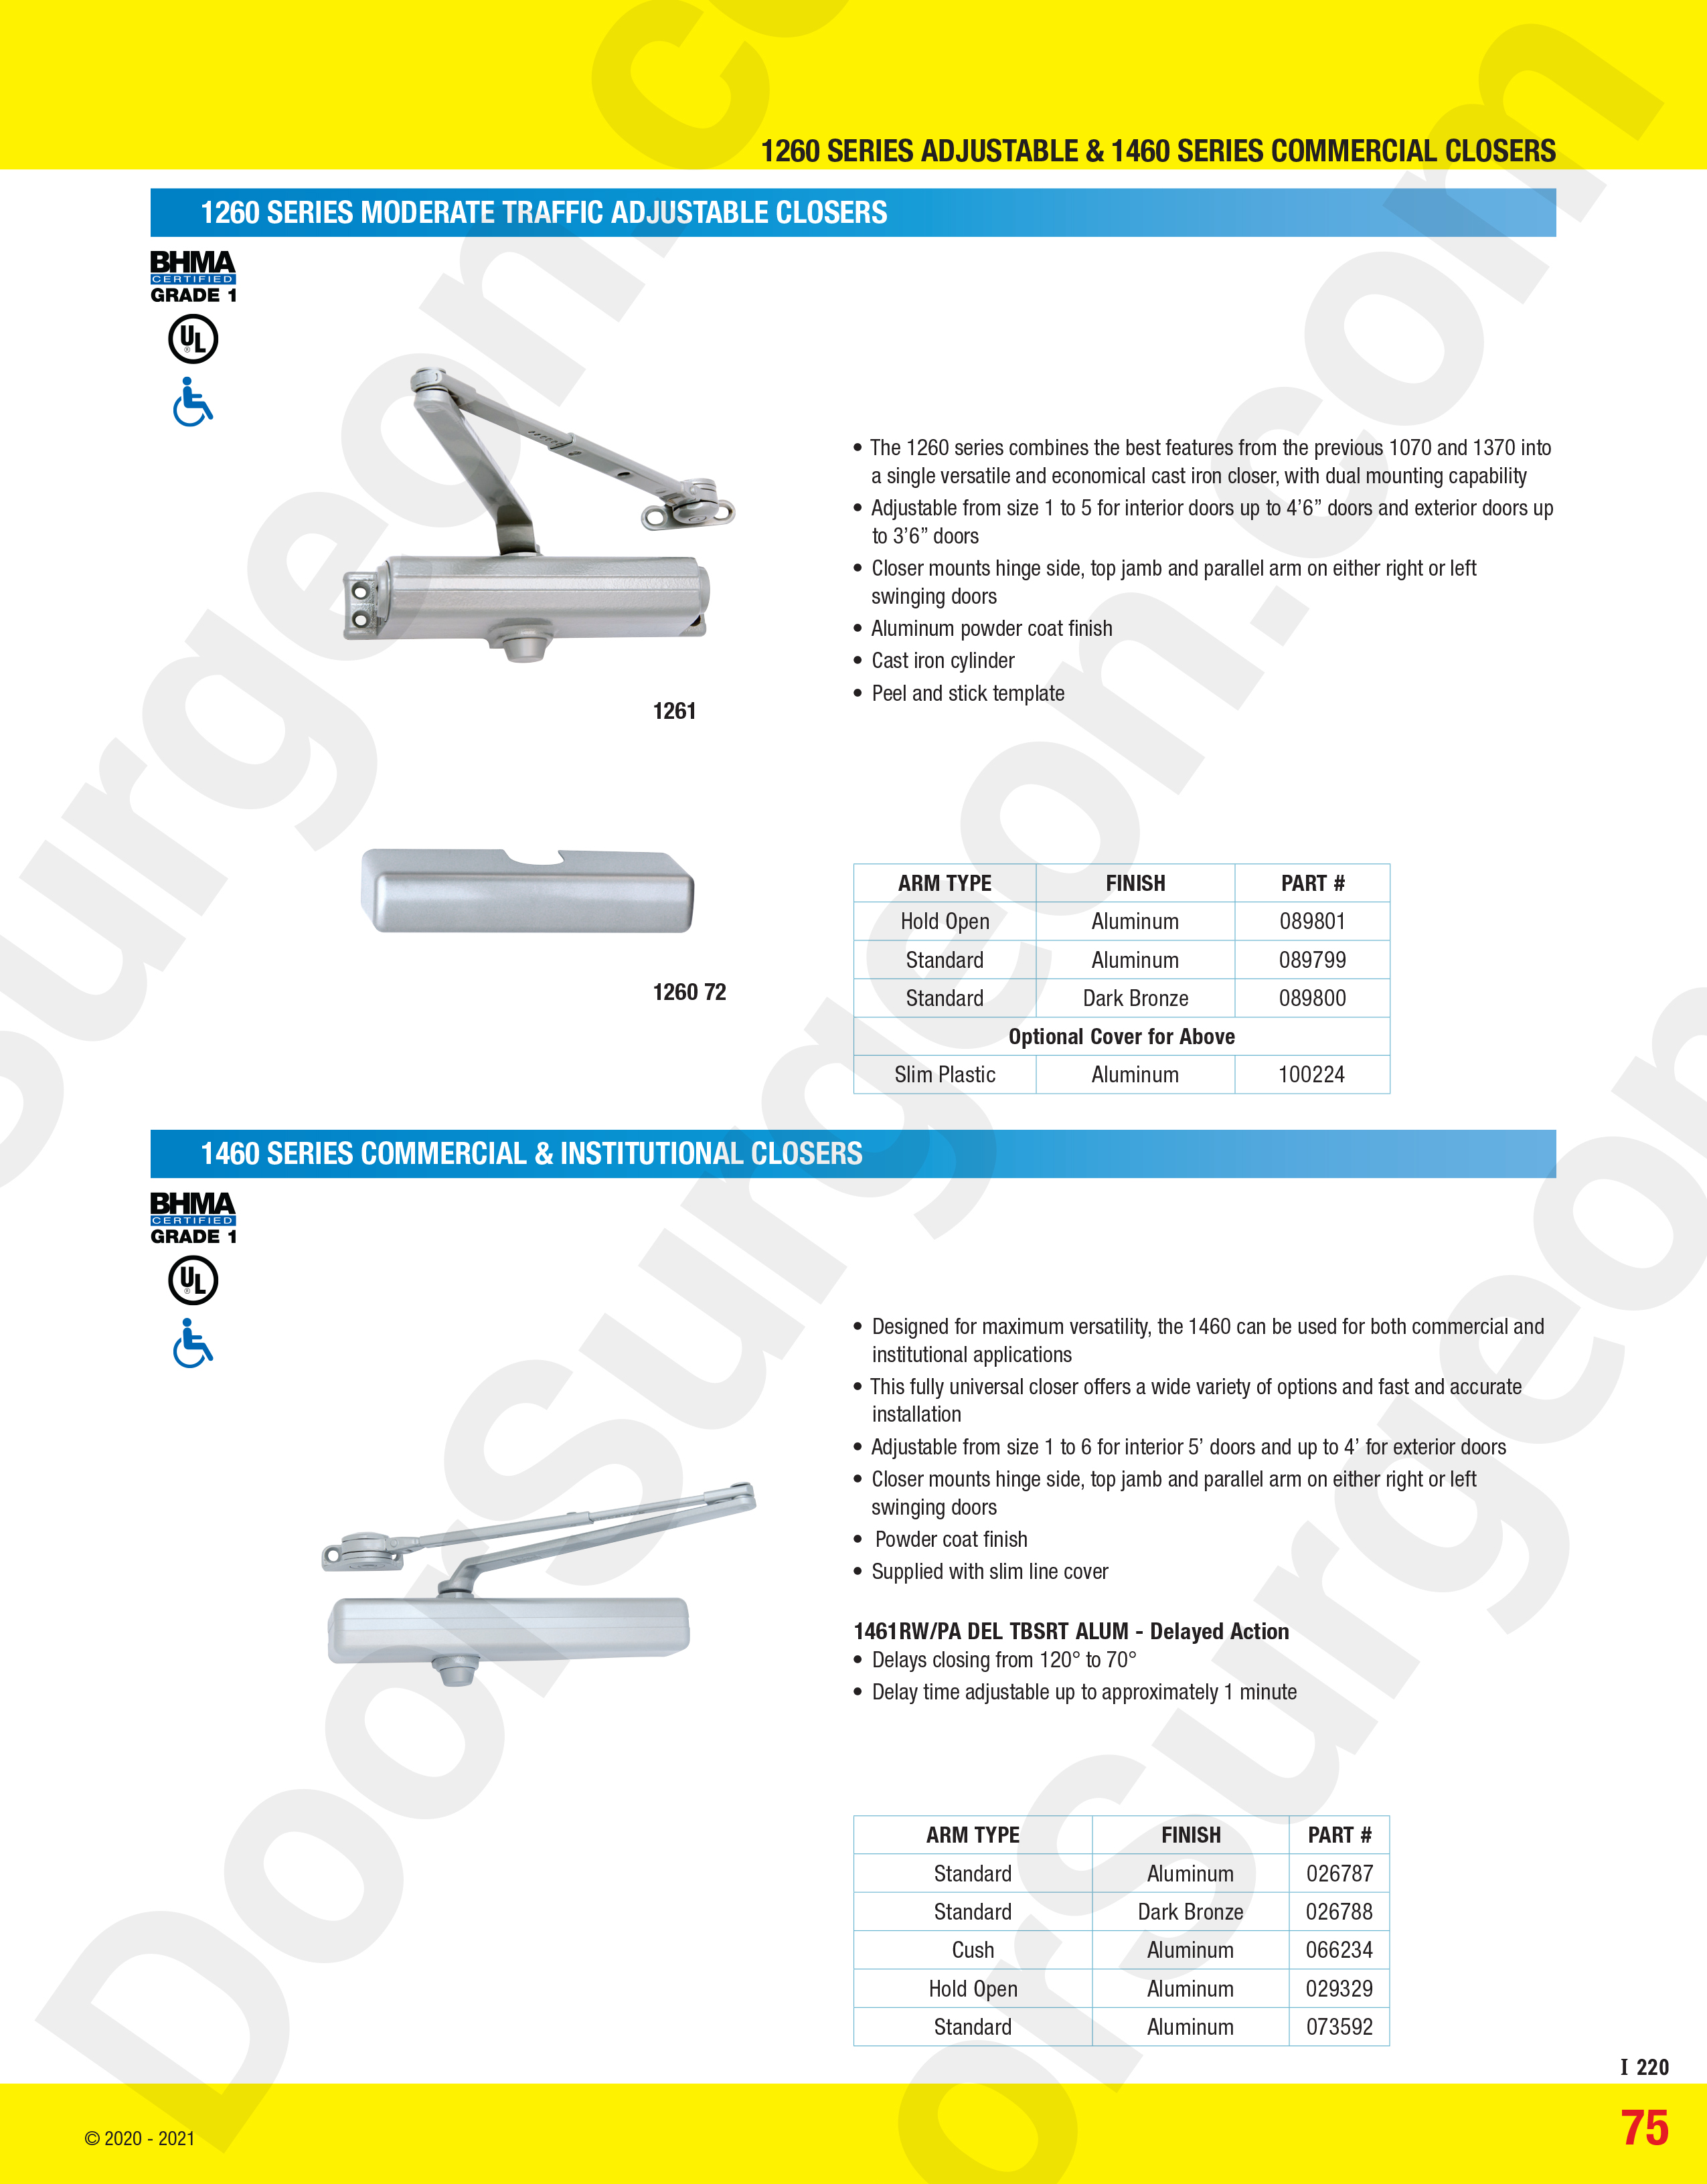 1260 Series moderate traffic adjustable closers and 1460 series commercial and institutional closers